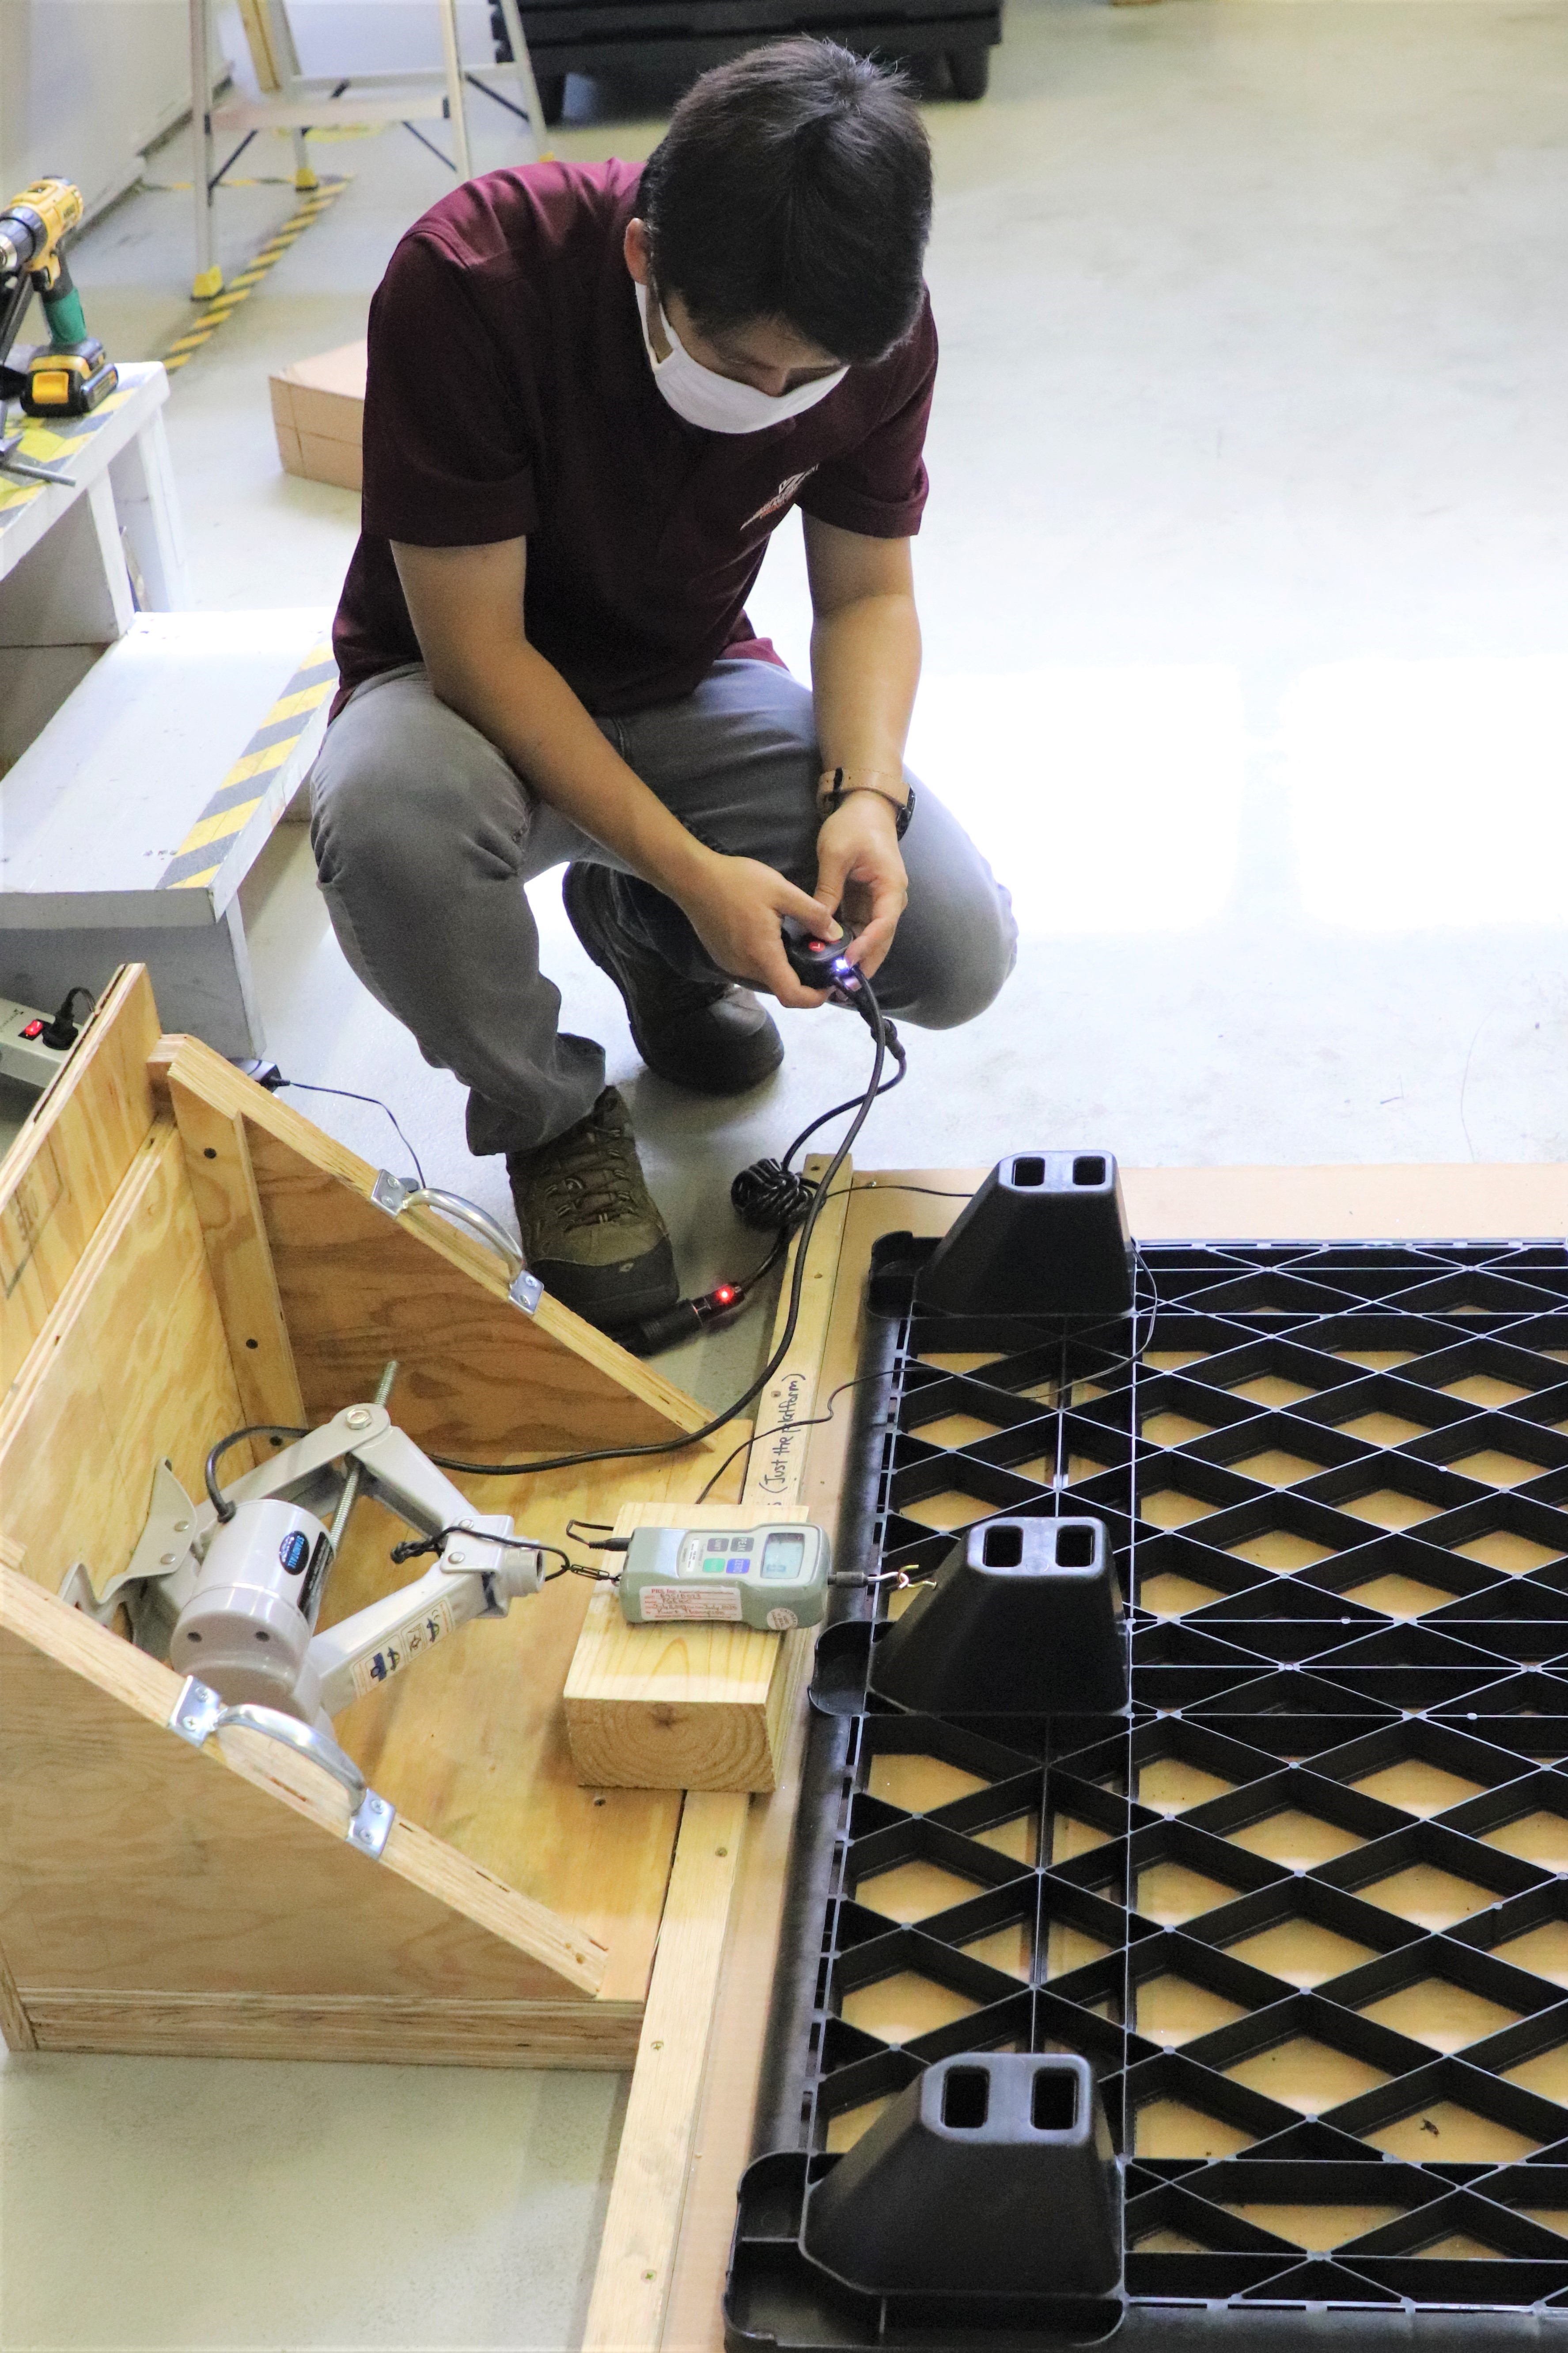 Image 3. Yu Yang conducting a Coefficient of Friction test on the plastic pallet.